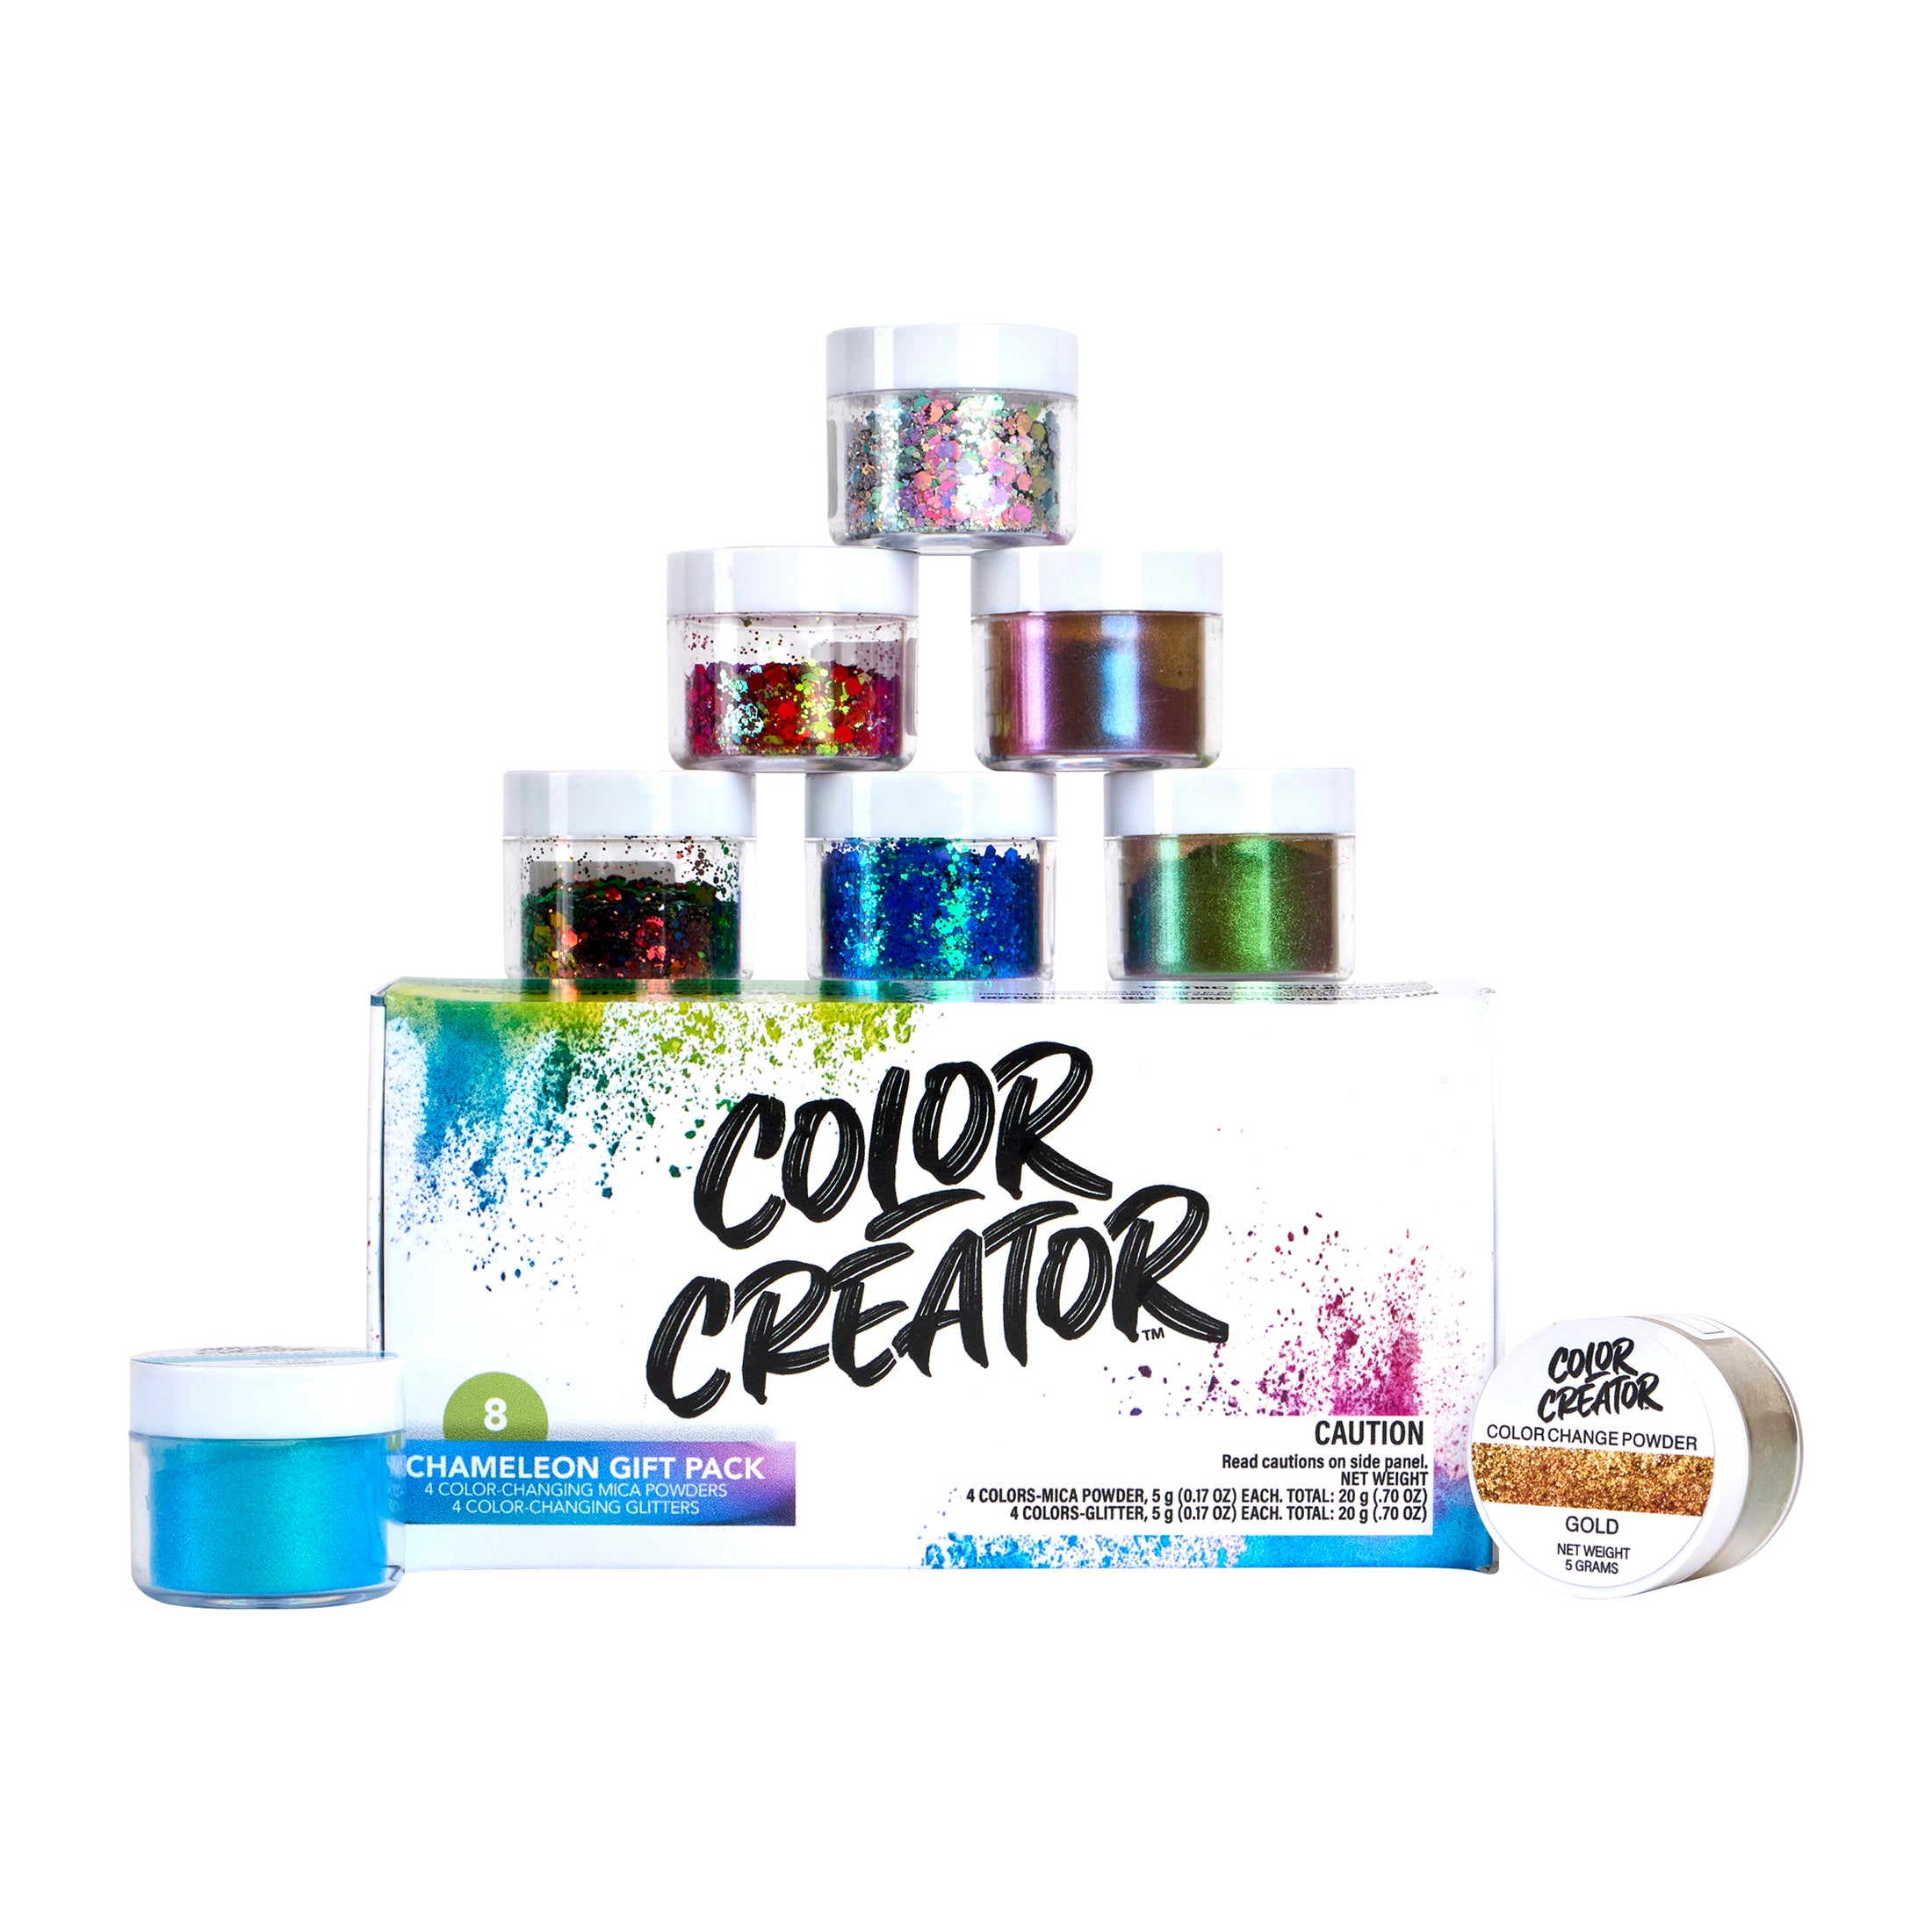 Colossal Chameleon Color Change Pack (8 pack) Mica Powders & Glitters –  Upstart Epoxy